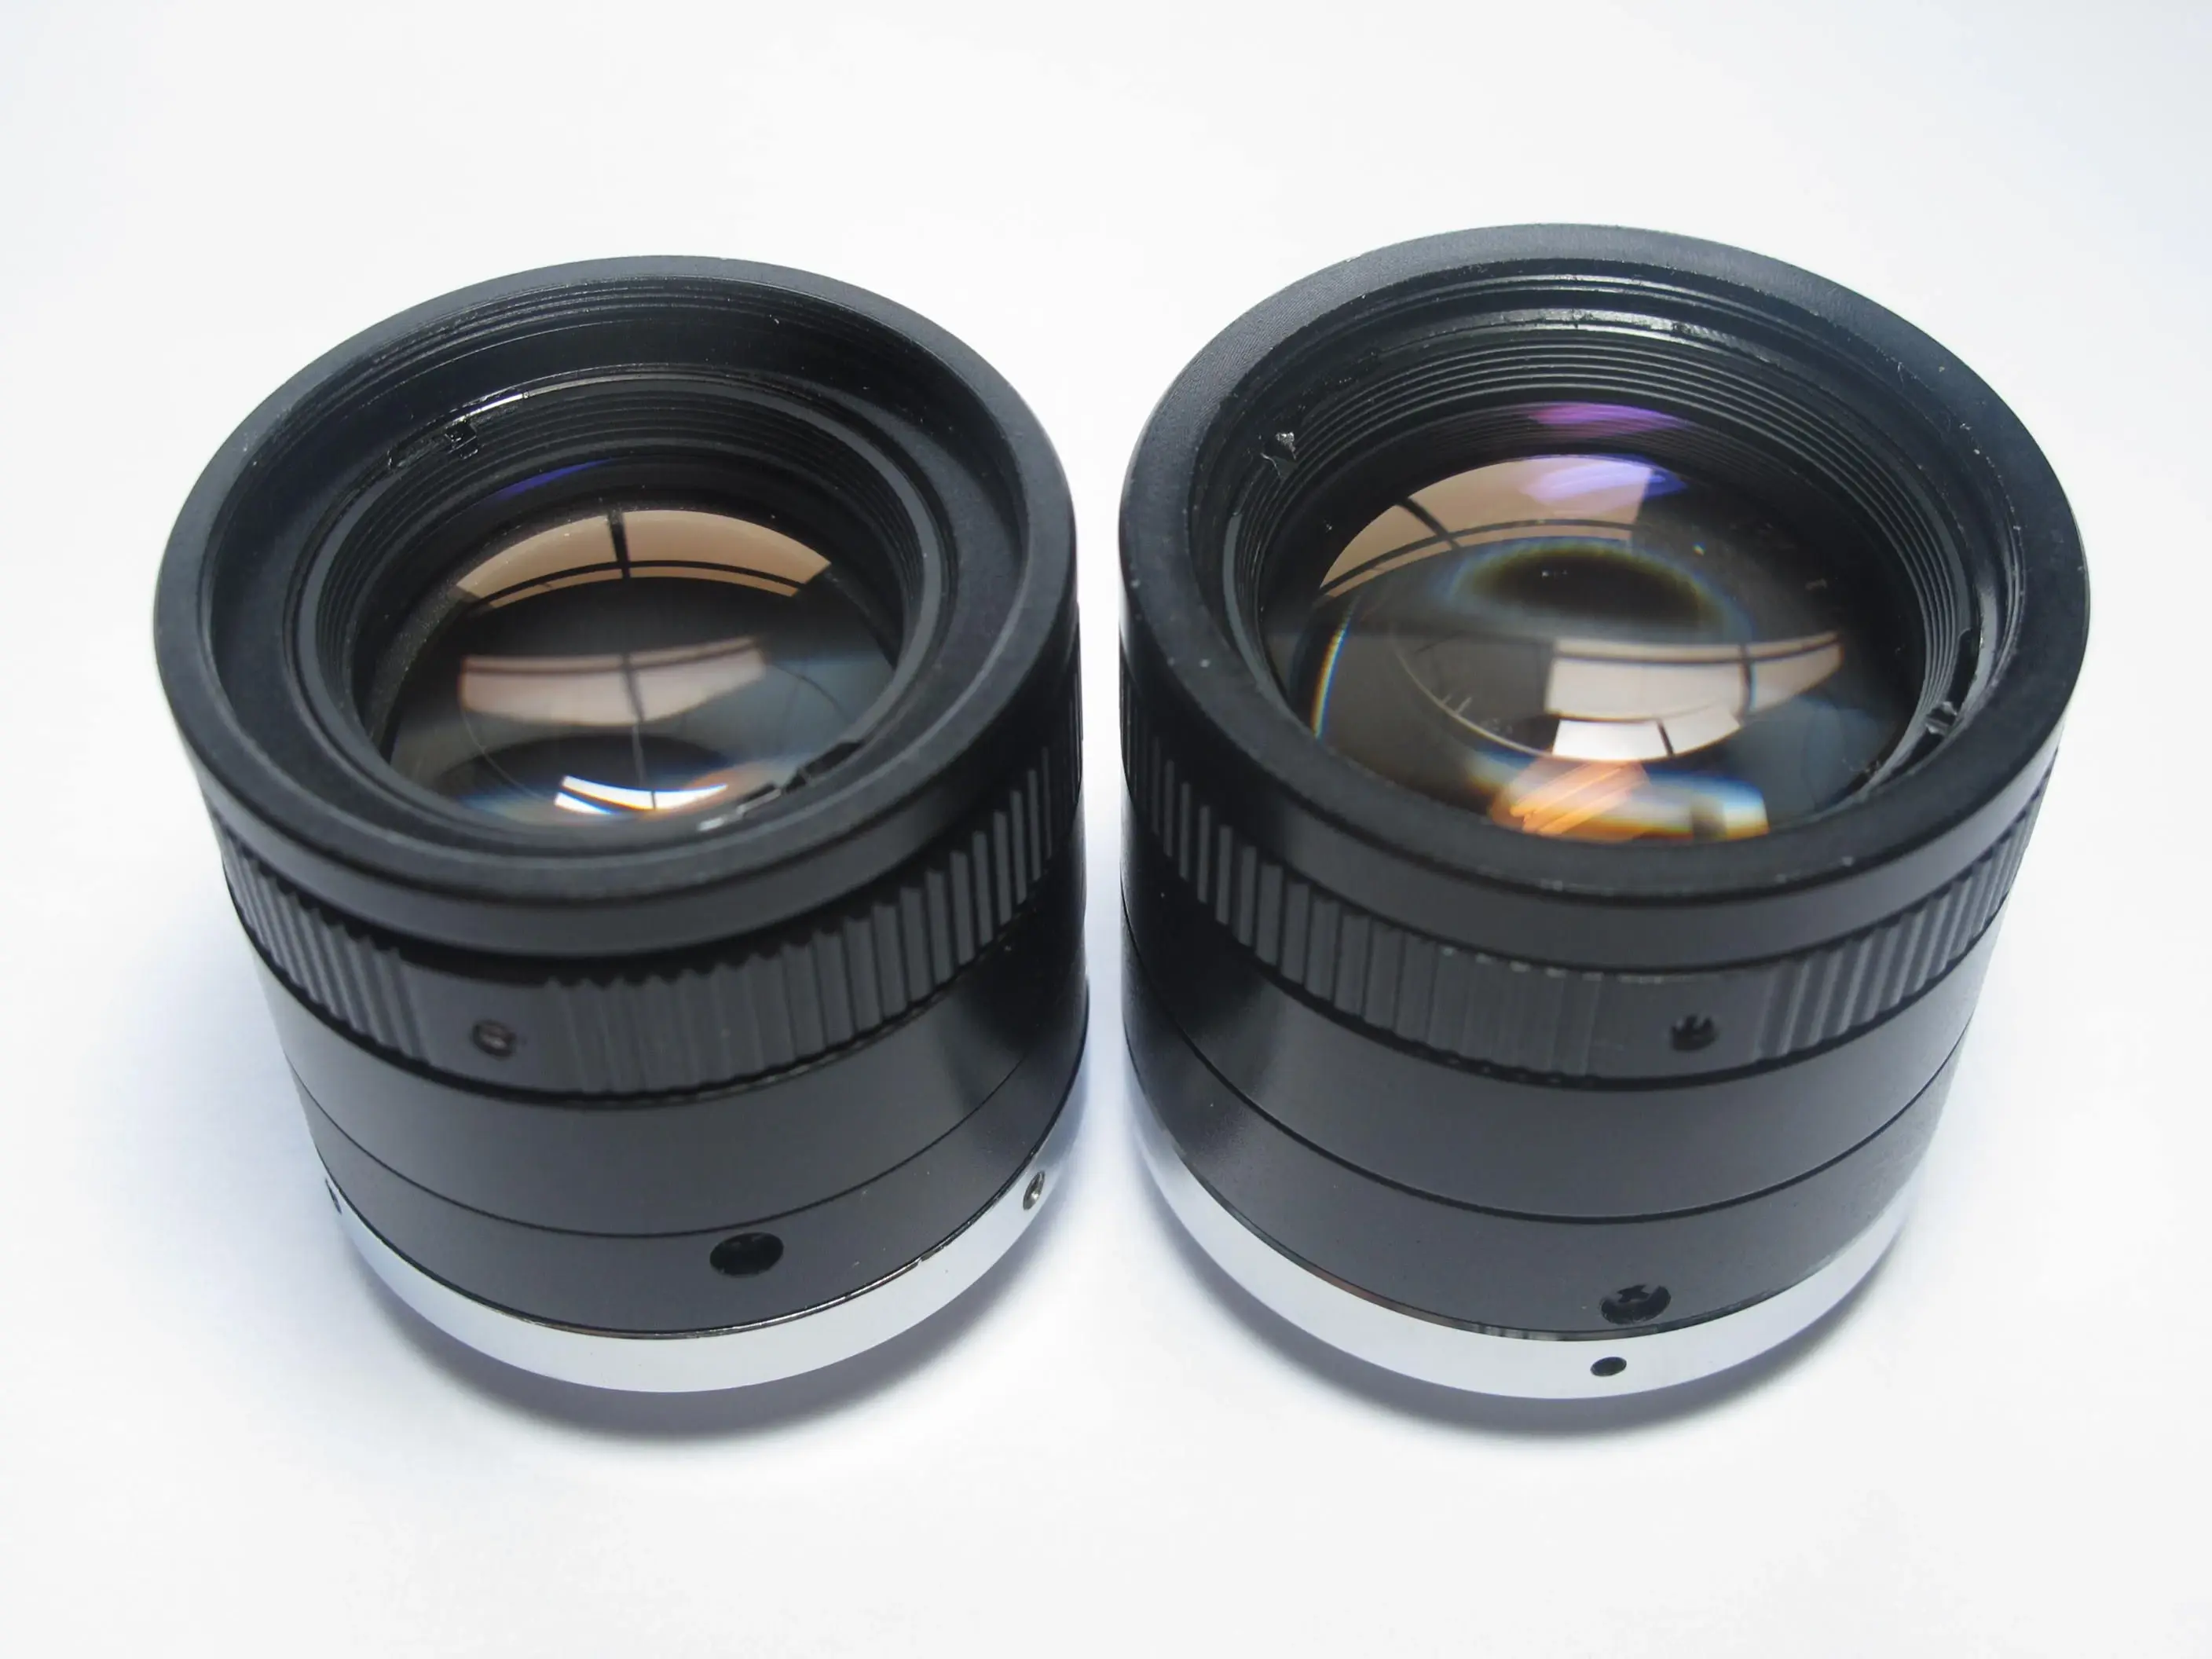 2/3 optical size 25mm industrial camera lens